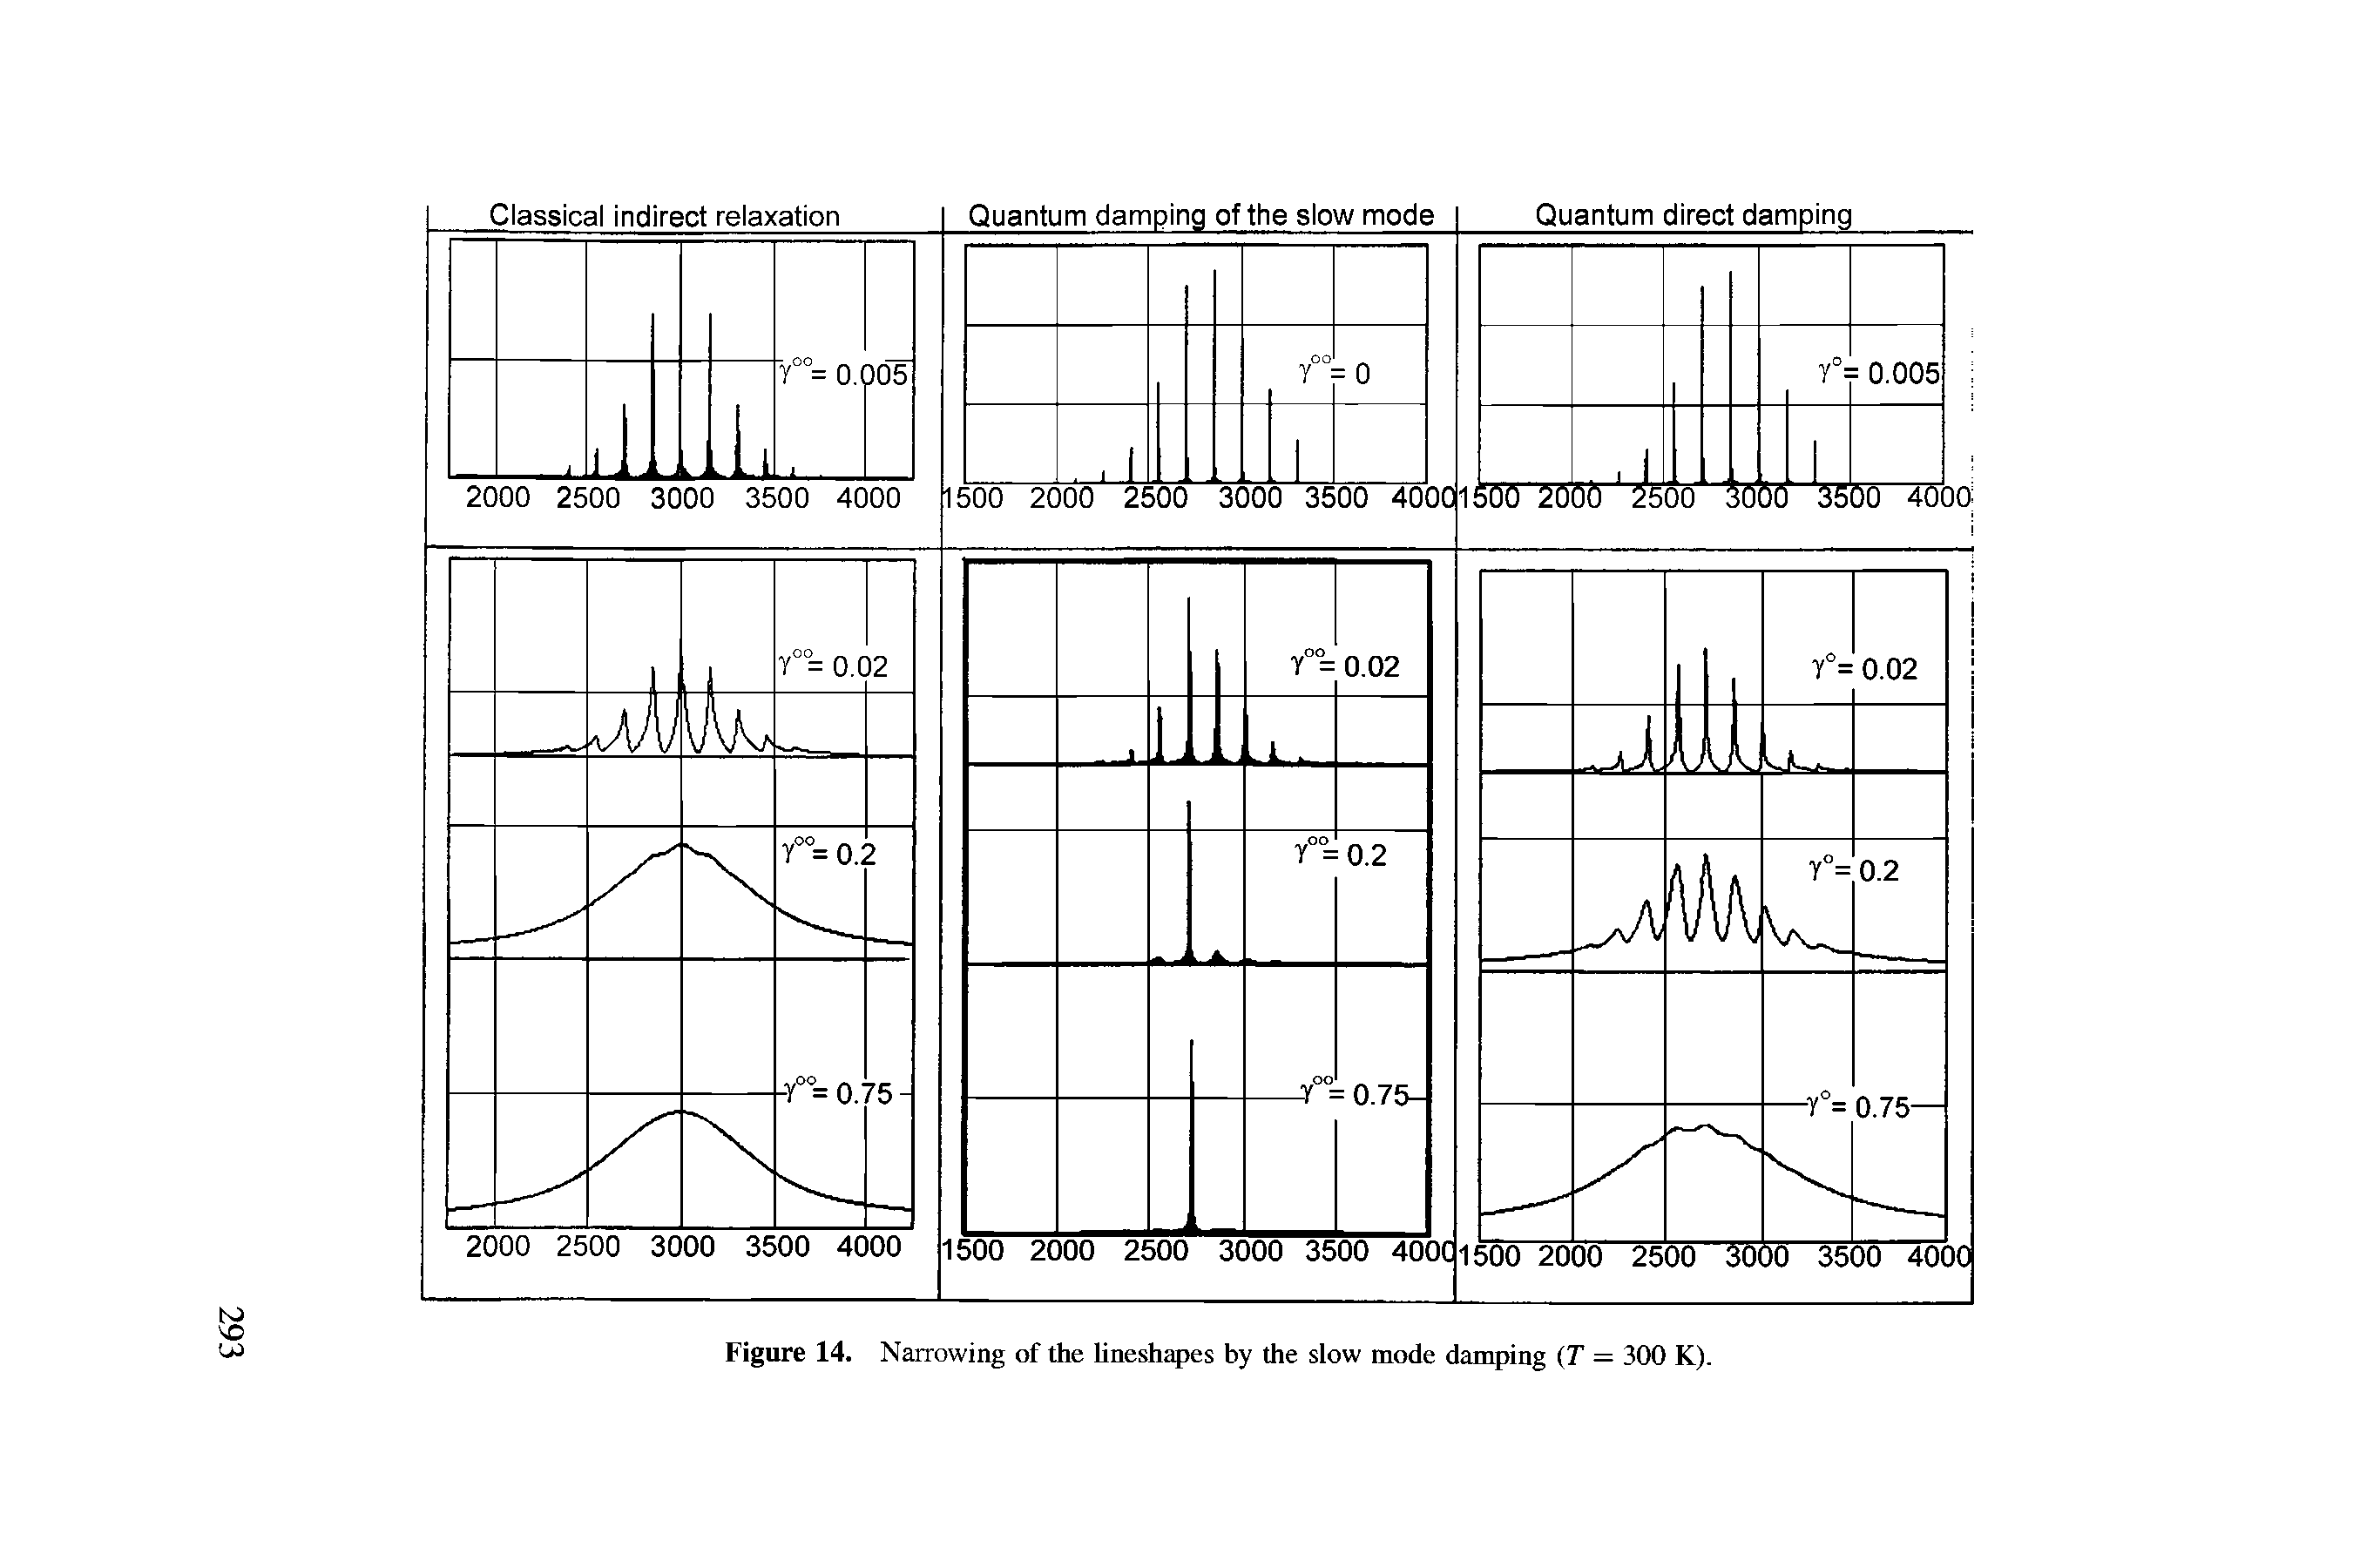 Figure 14. Narrowing of the lineshapes by the slow mode damping (T = 300 K).